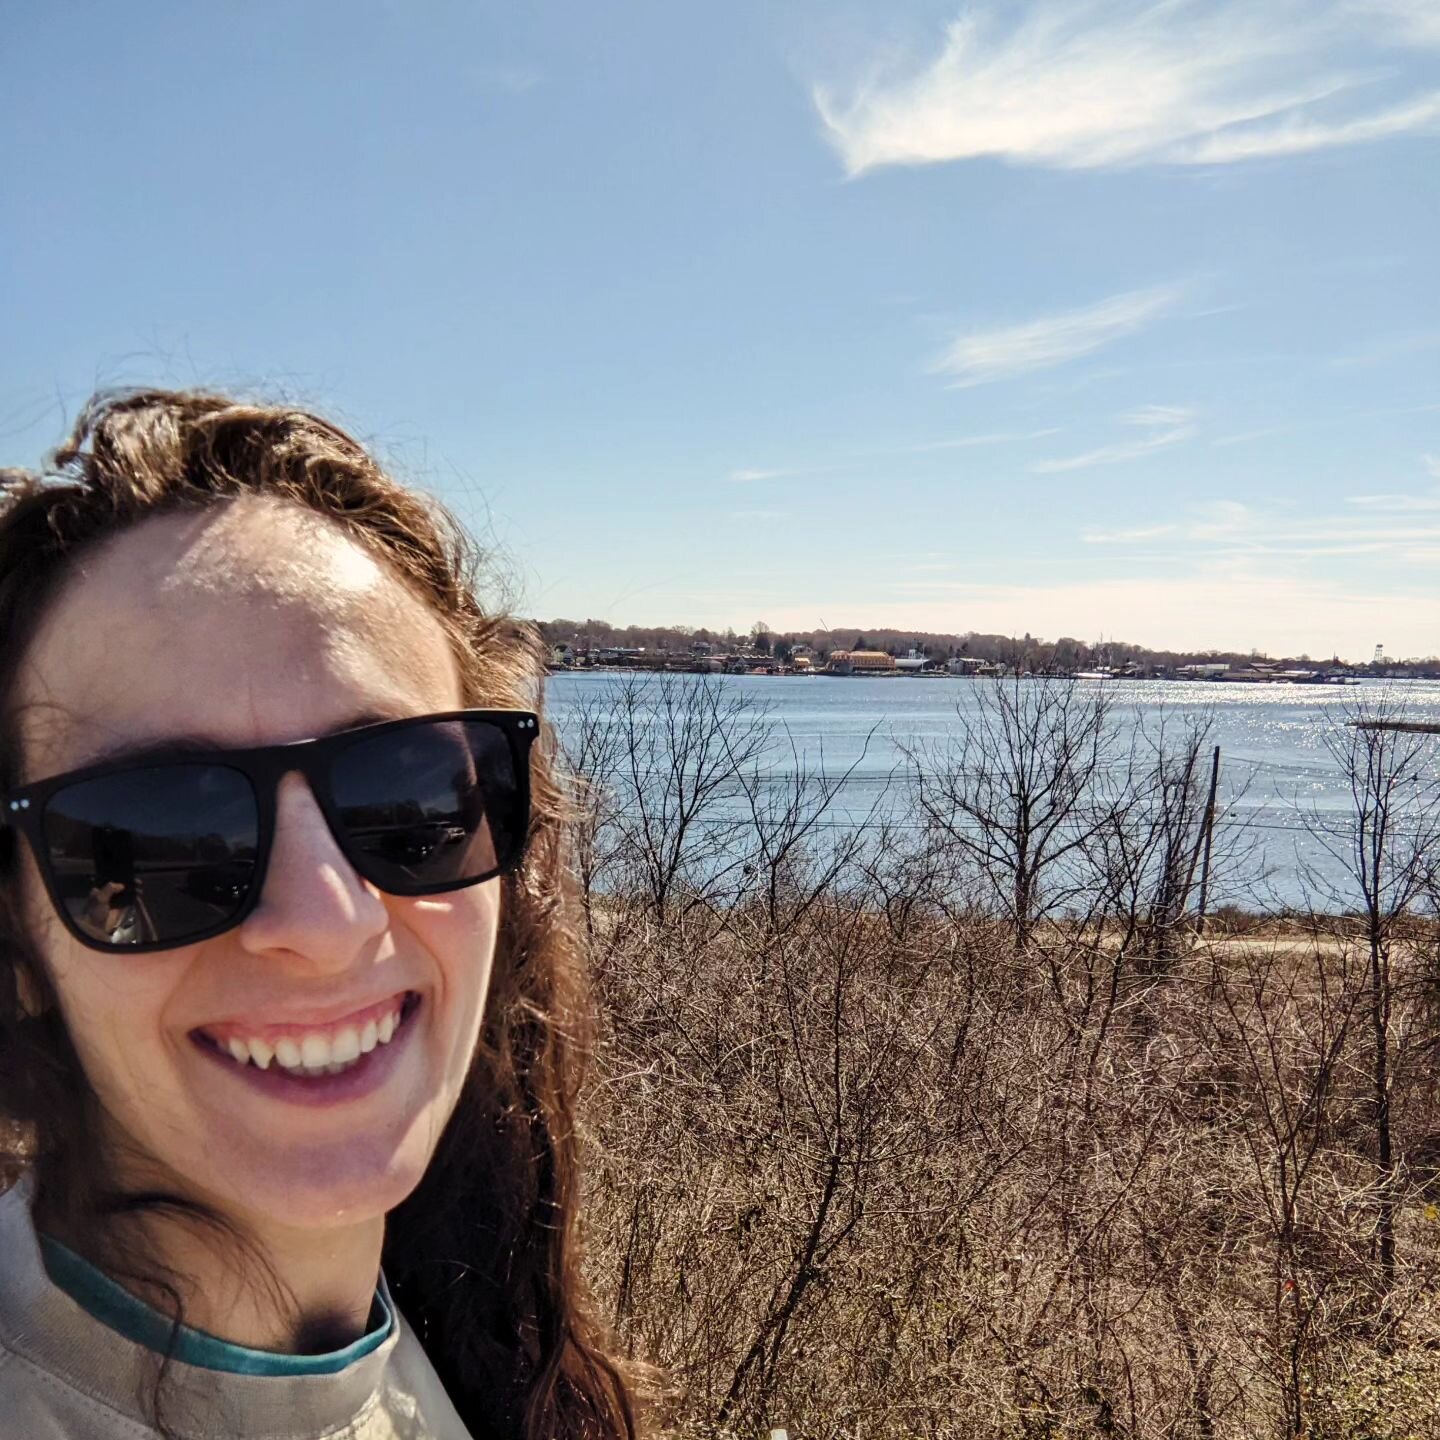 Stopped at this ~scenic overlook~ somewhere on 95 in CT to remind y'all that I'll be in Providence tonight! 6pm doors, 7pm show at @askewprov with @benjaminshawmusic and Bible Studies! $10 cover, hope to see you there 😘